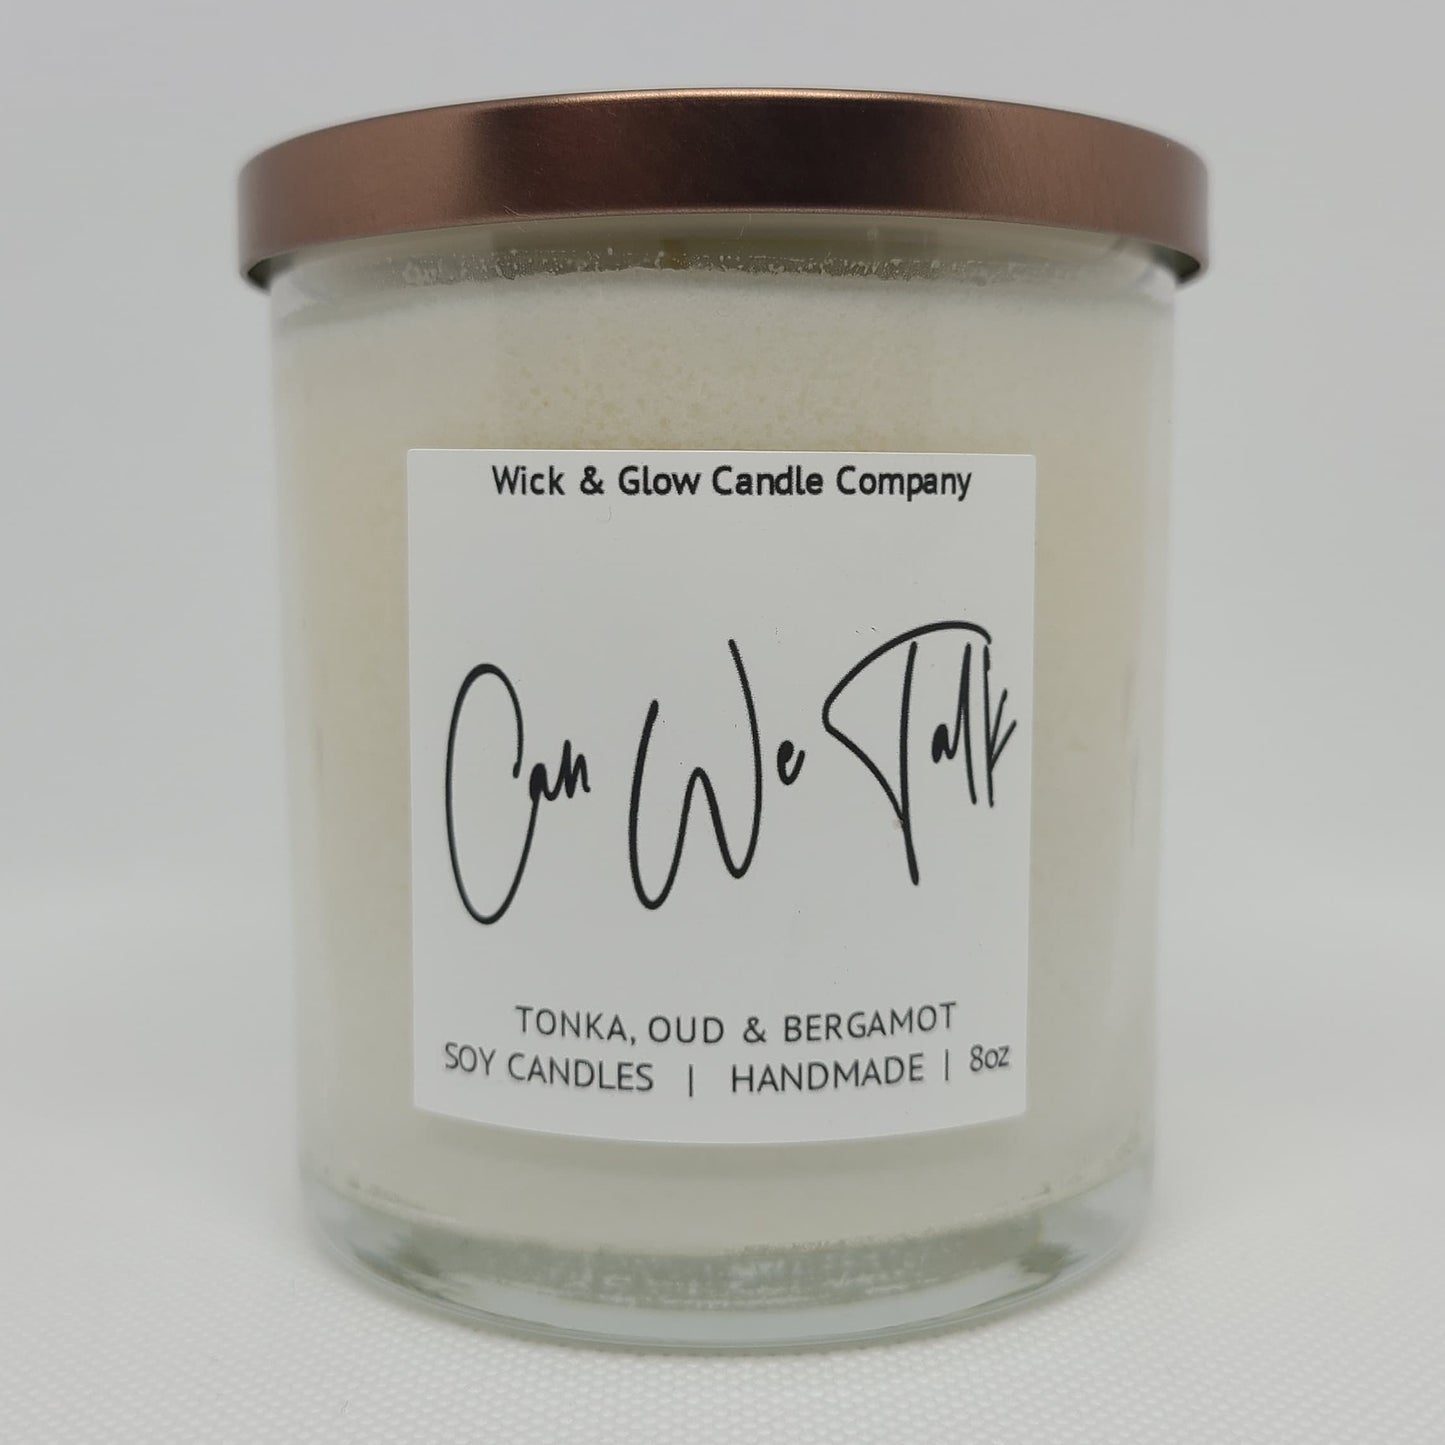 Can We Talk -Tonka and Oud Luxury Scented Candle - The Wick and Glow Candle Company